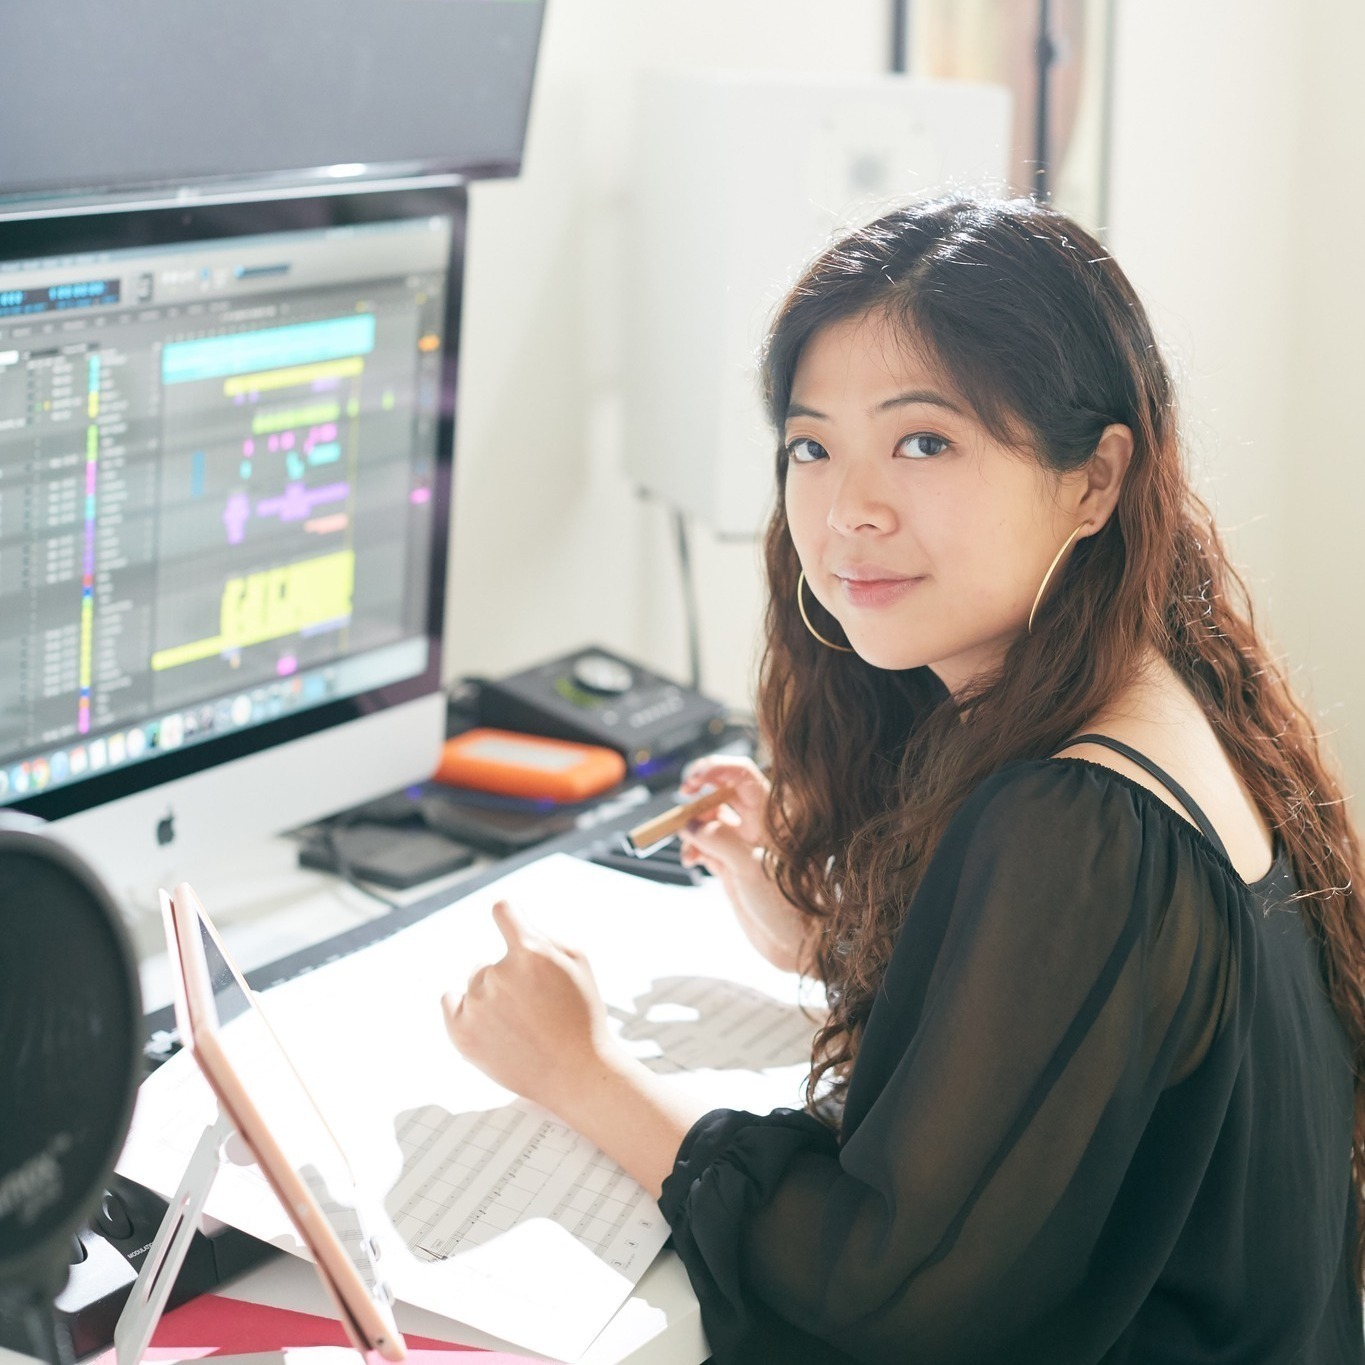 Successful Musicians Podcast – Episode #41: From Assistant to Composer: Joy Ngiaw’s Quest for Creative Inspiration